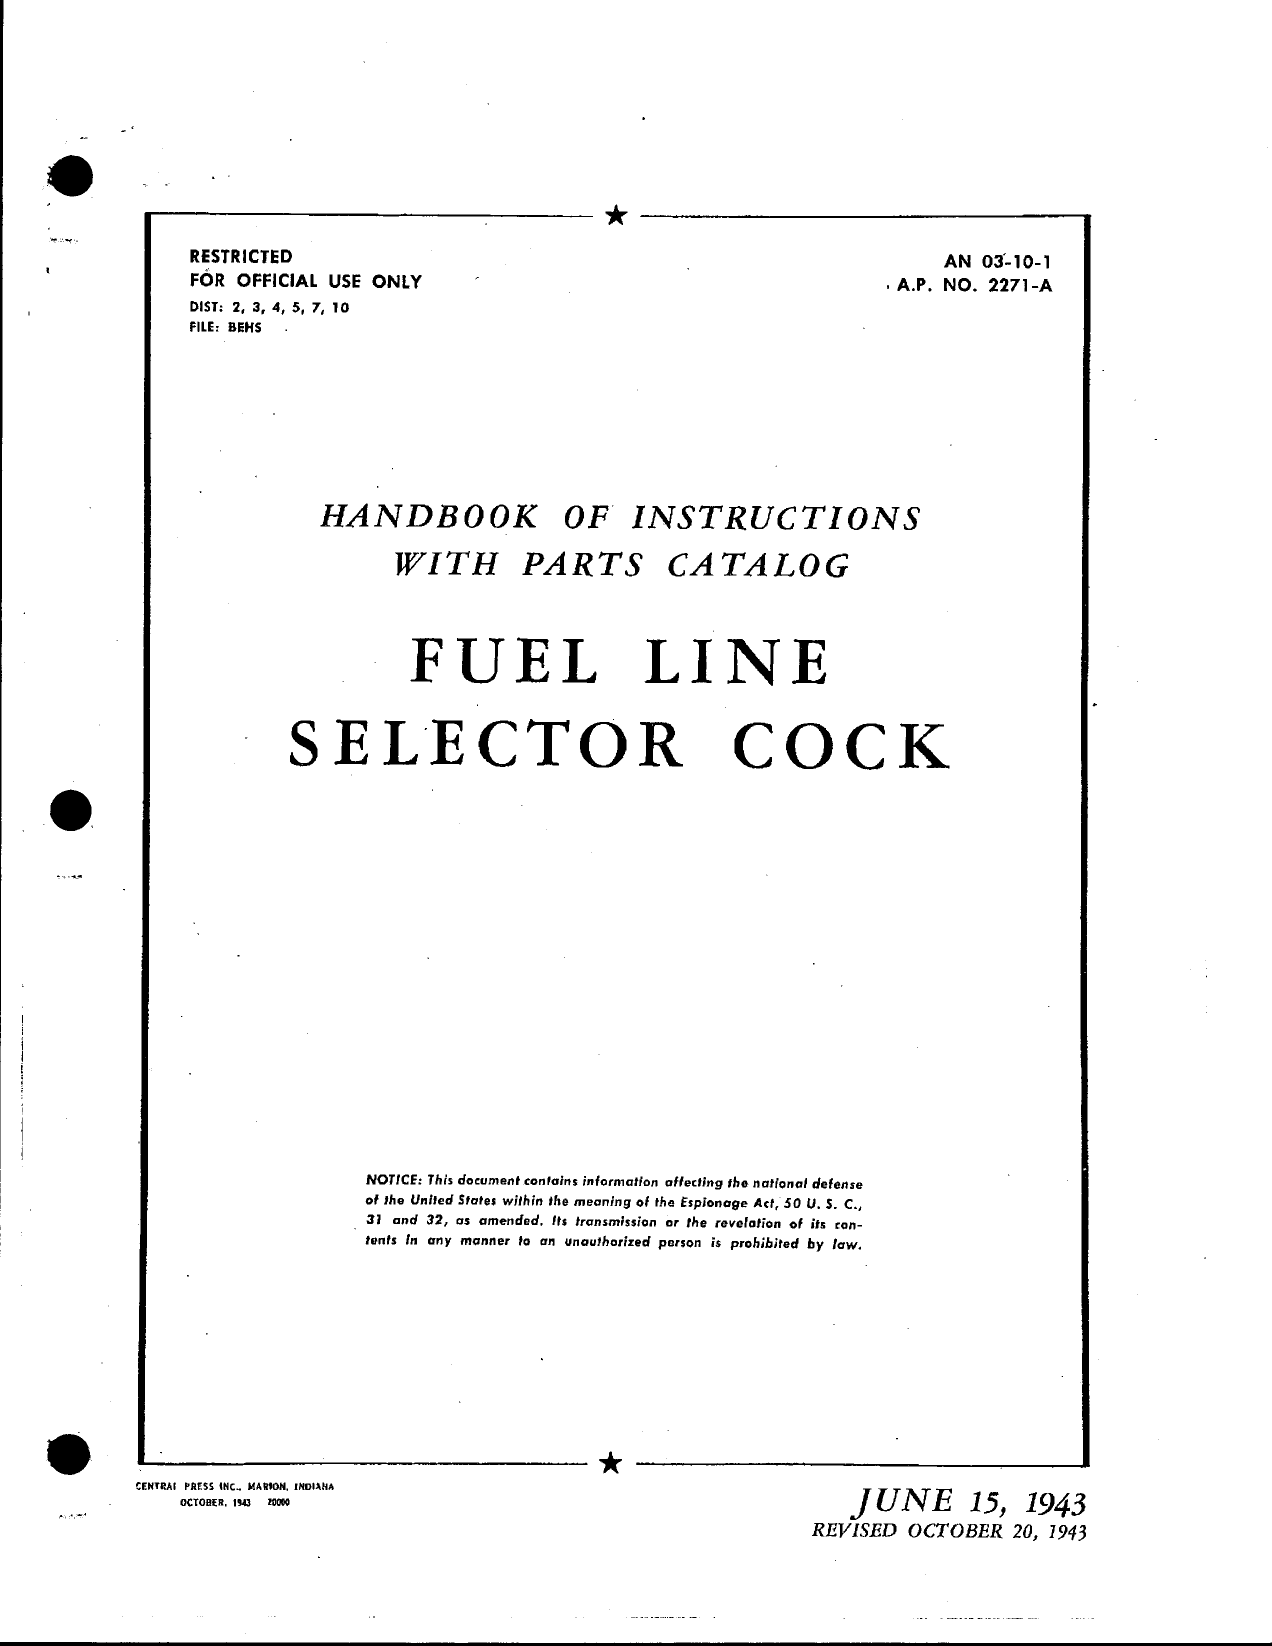 Sample page 1 from AirCorps Library document: Handbook with Parts Catalog for Fuel Line Selector Cock